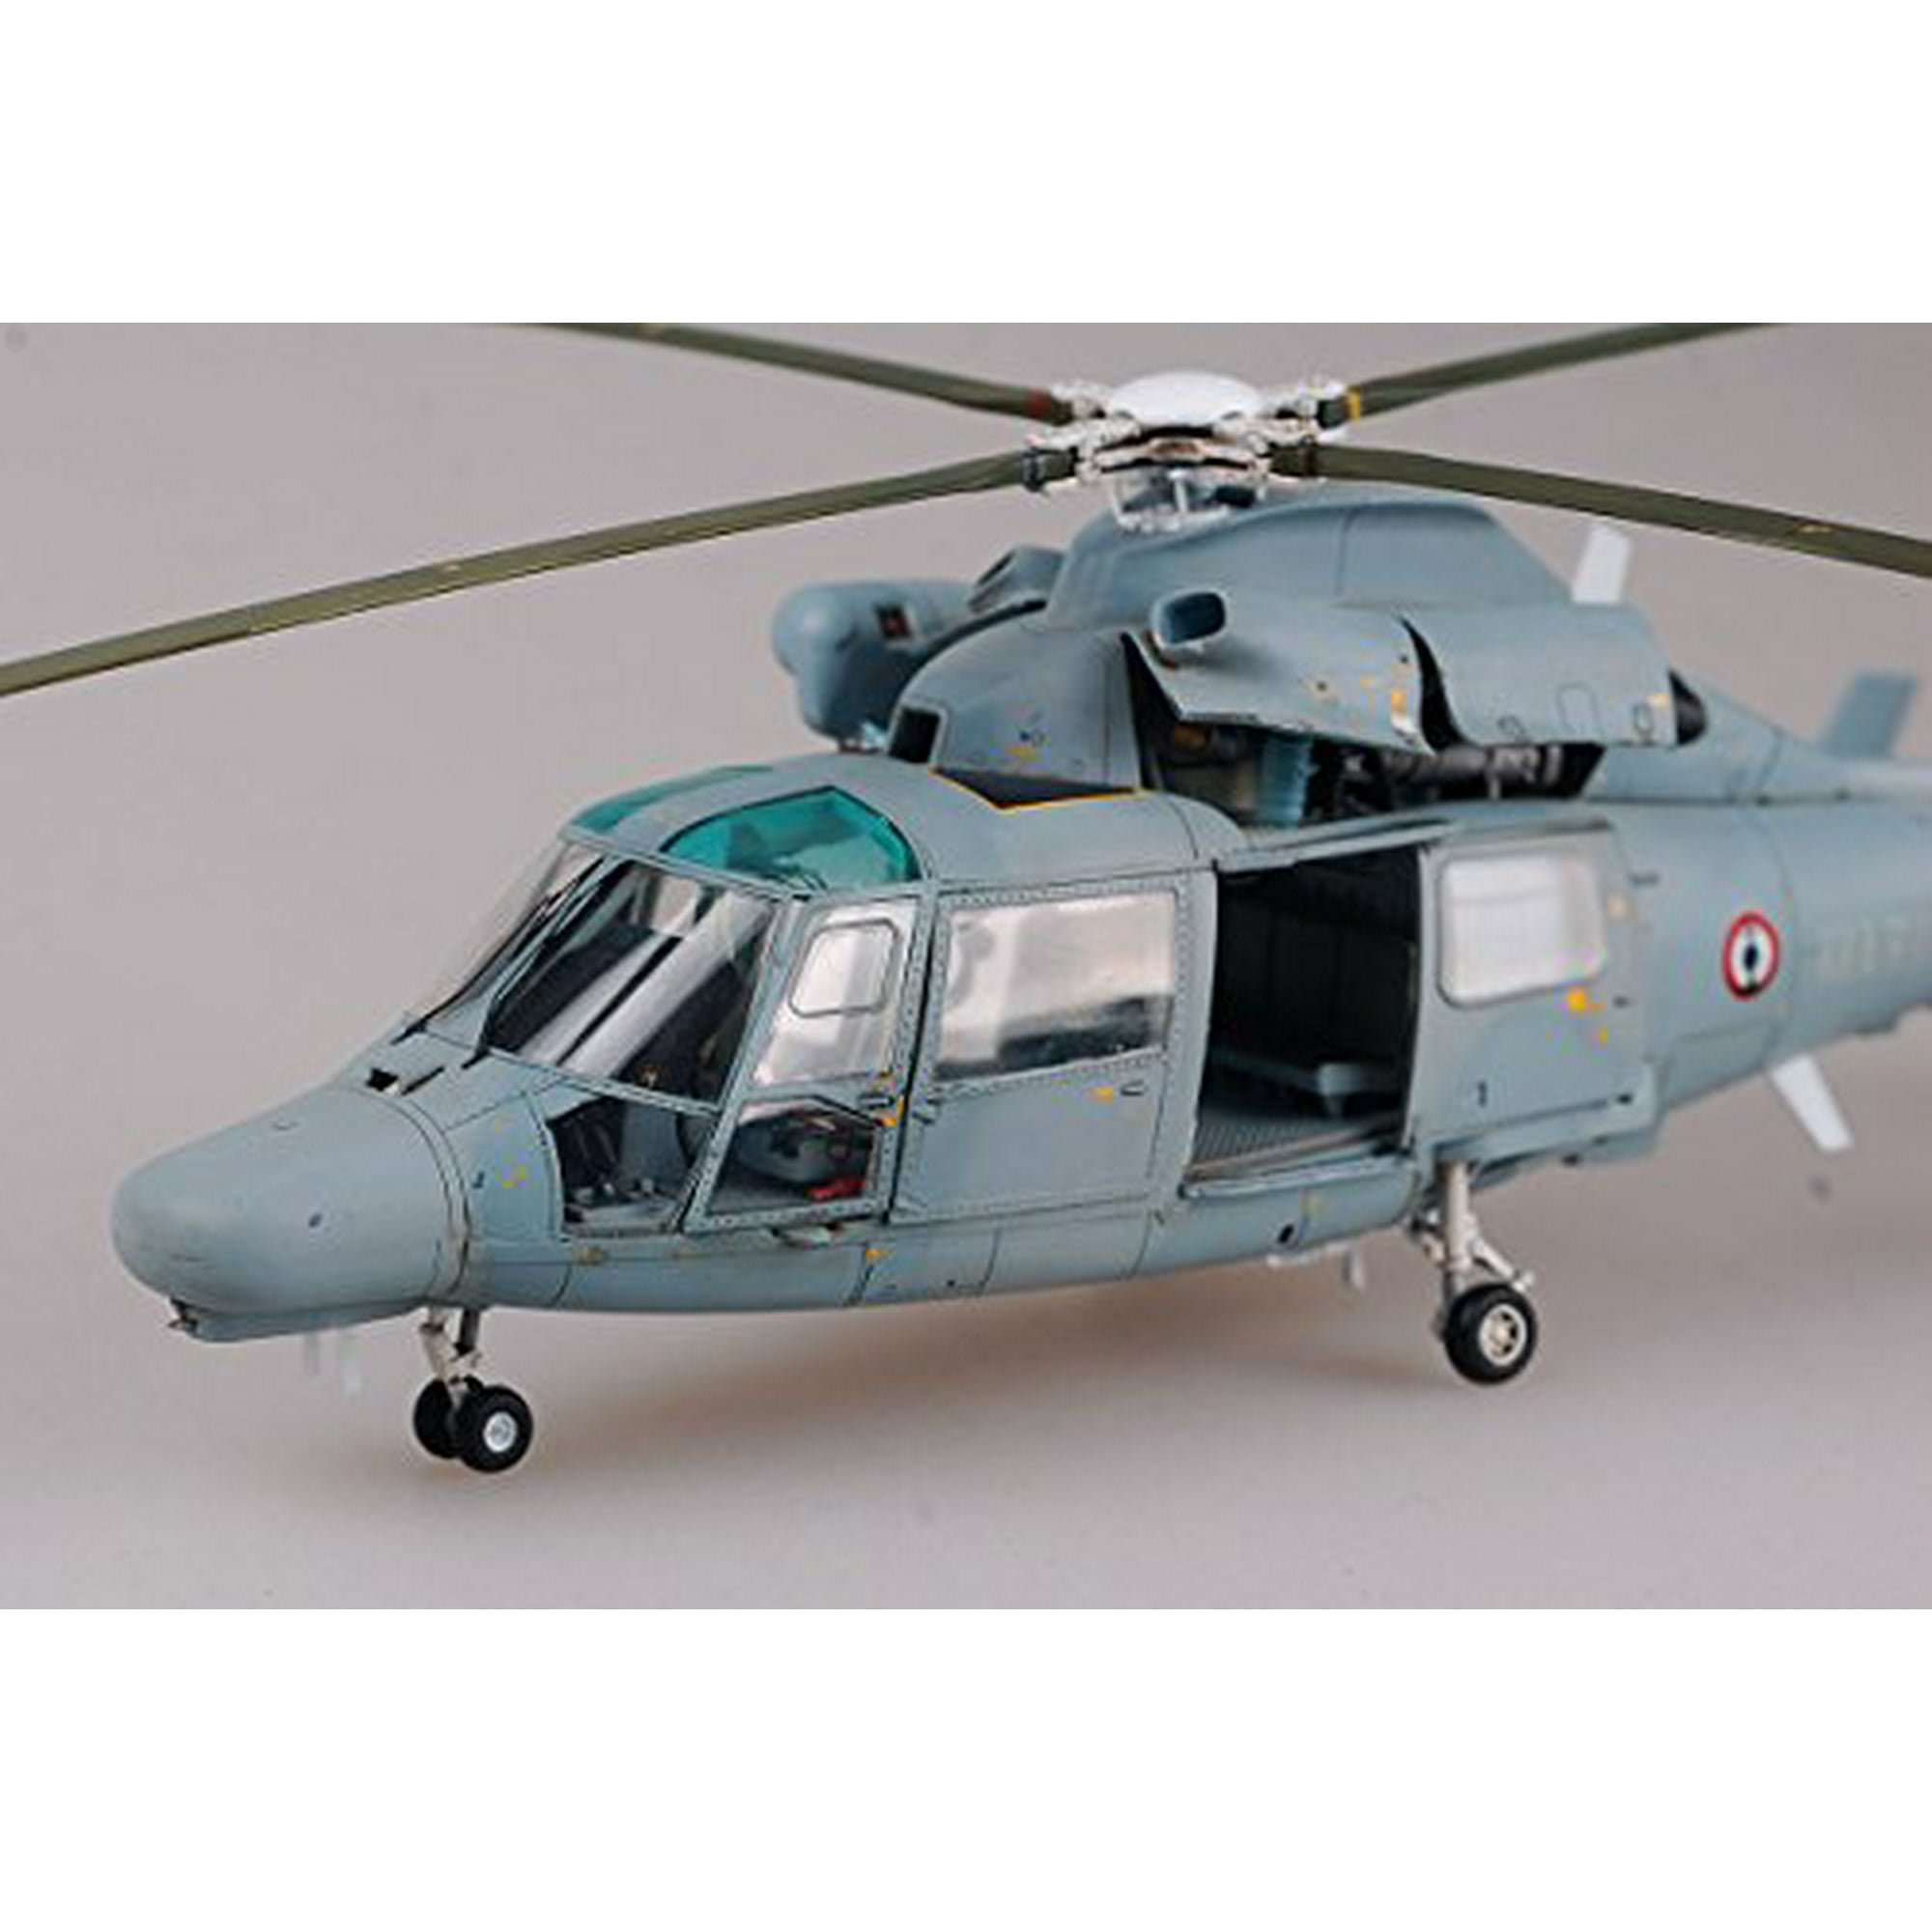 Kitty Hawk KH80108 1 48 Sa.365f As.565sa Dauphin II Helicopter Model Kit for sale online